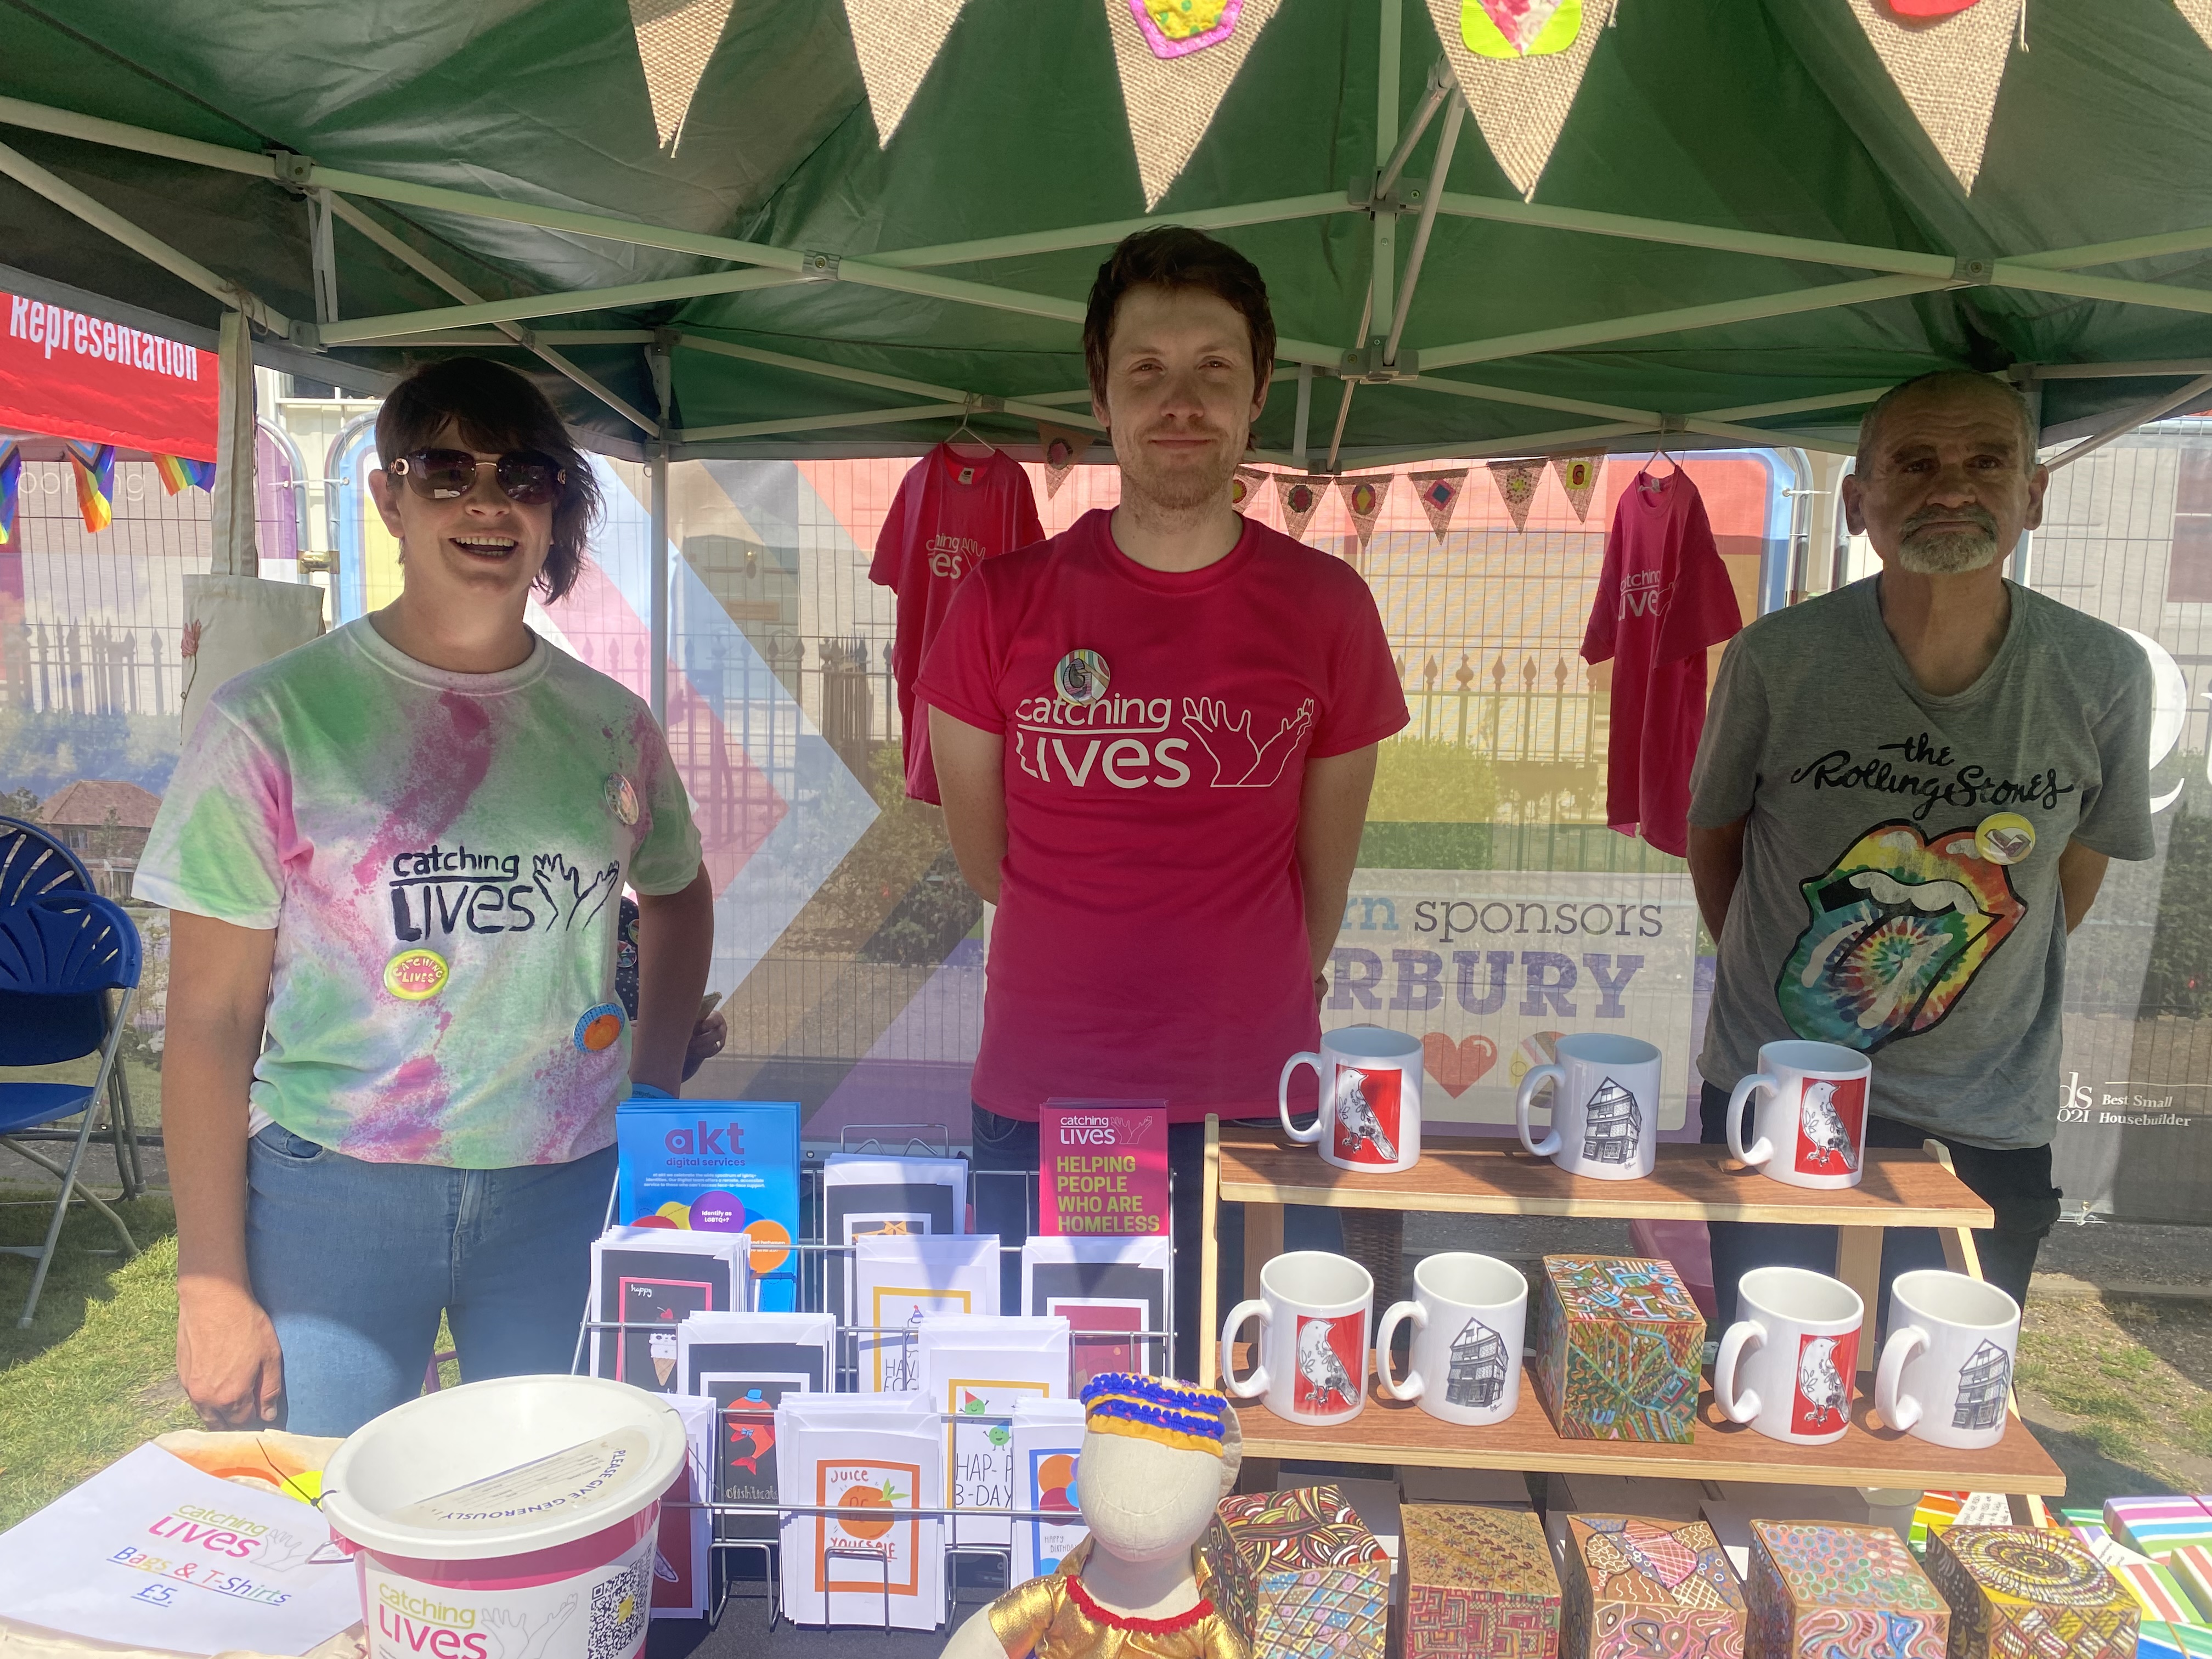 The Catching Lives stall at Pride Canterbury